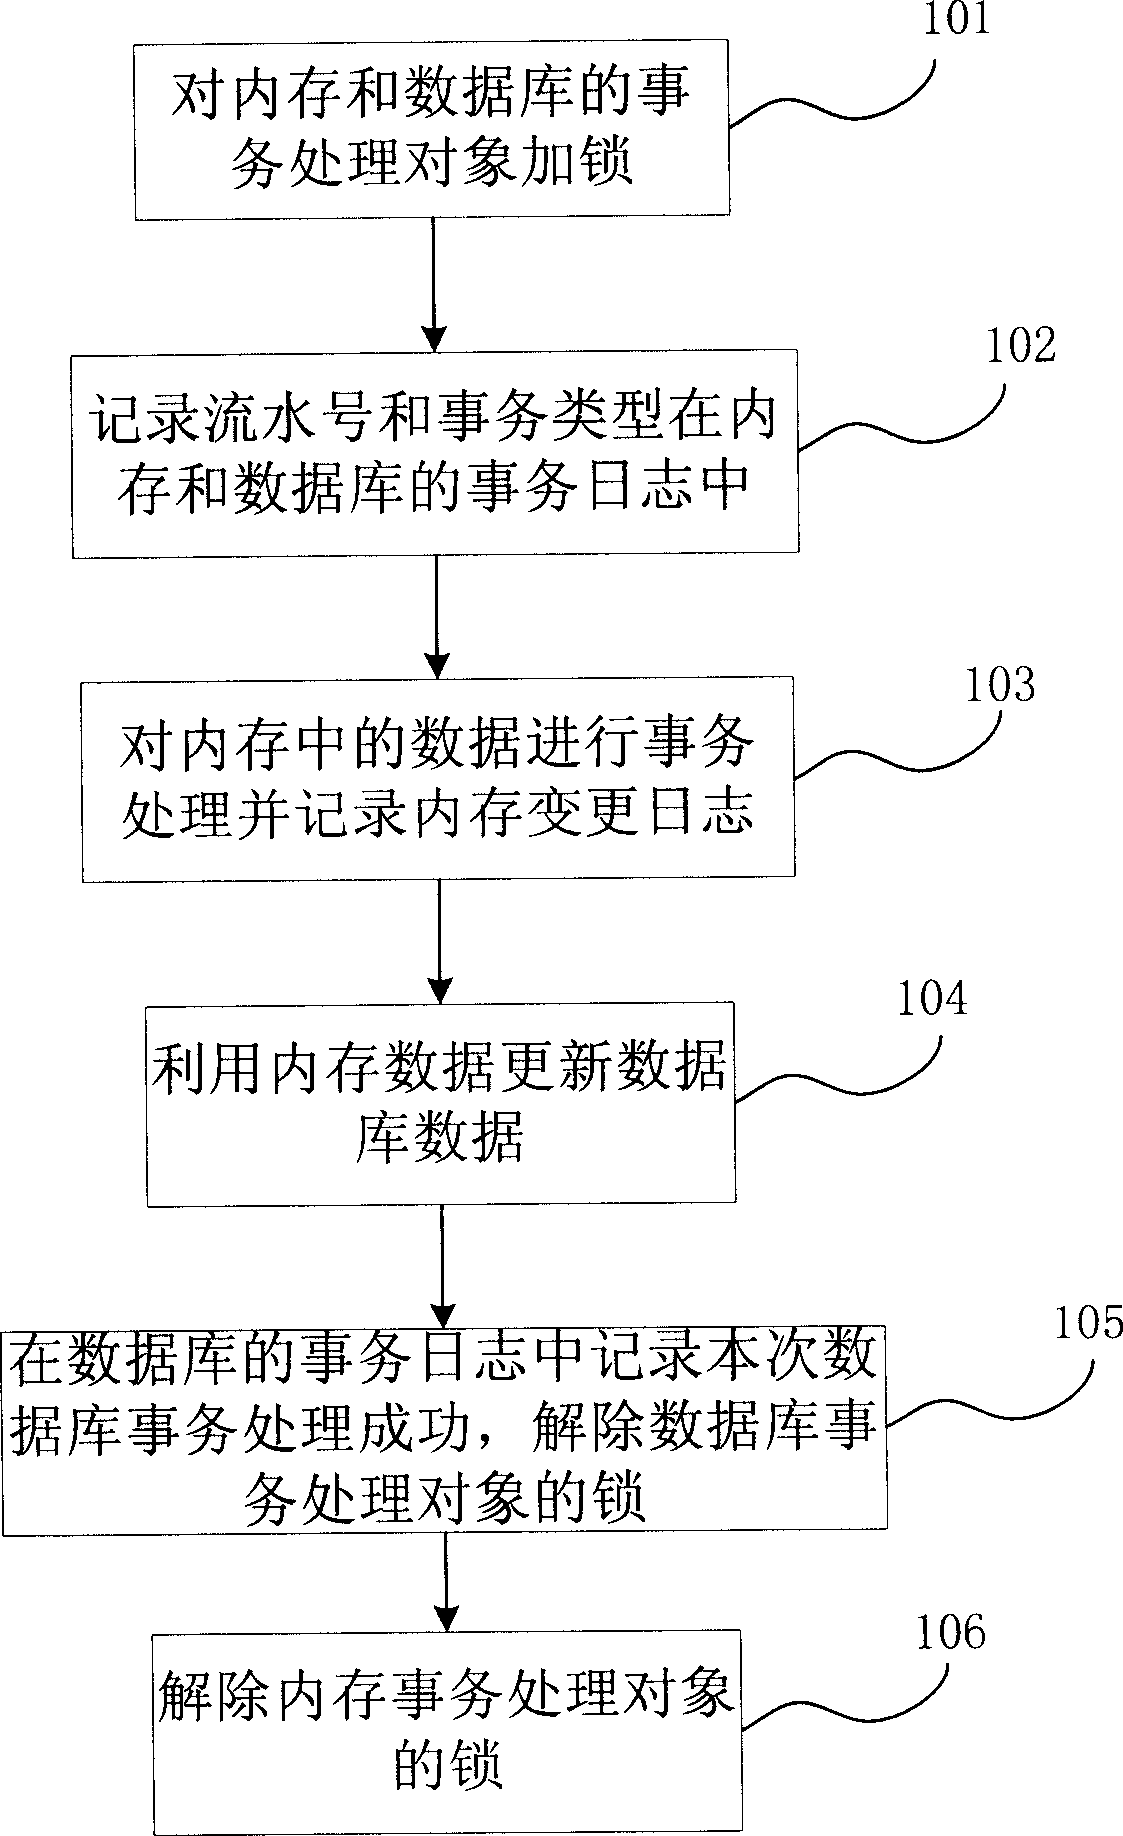 Processing method for realizing consistency of internal storage data and data bank data service